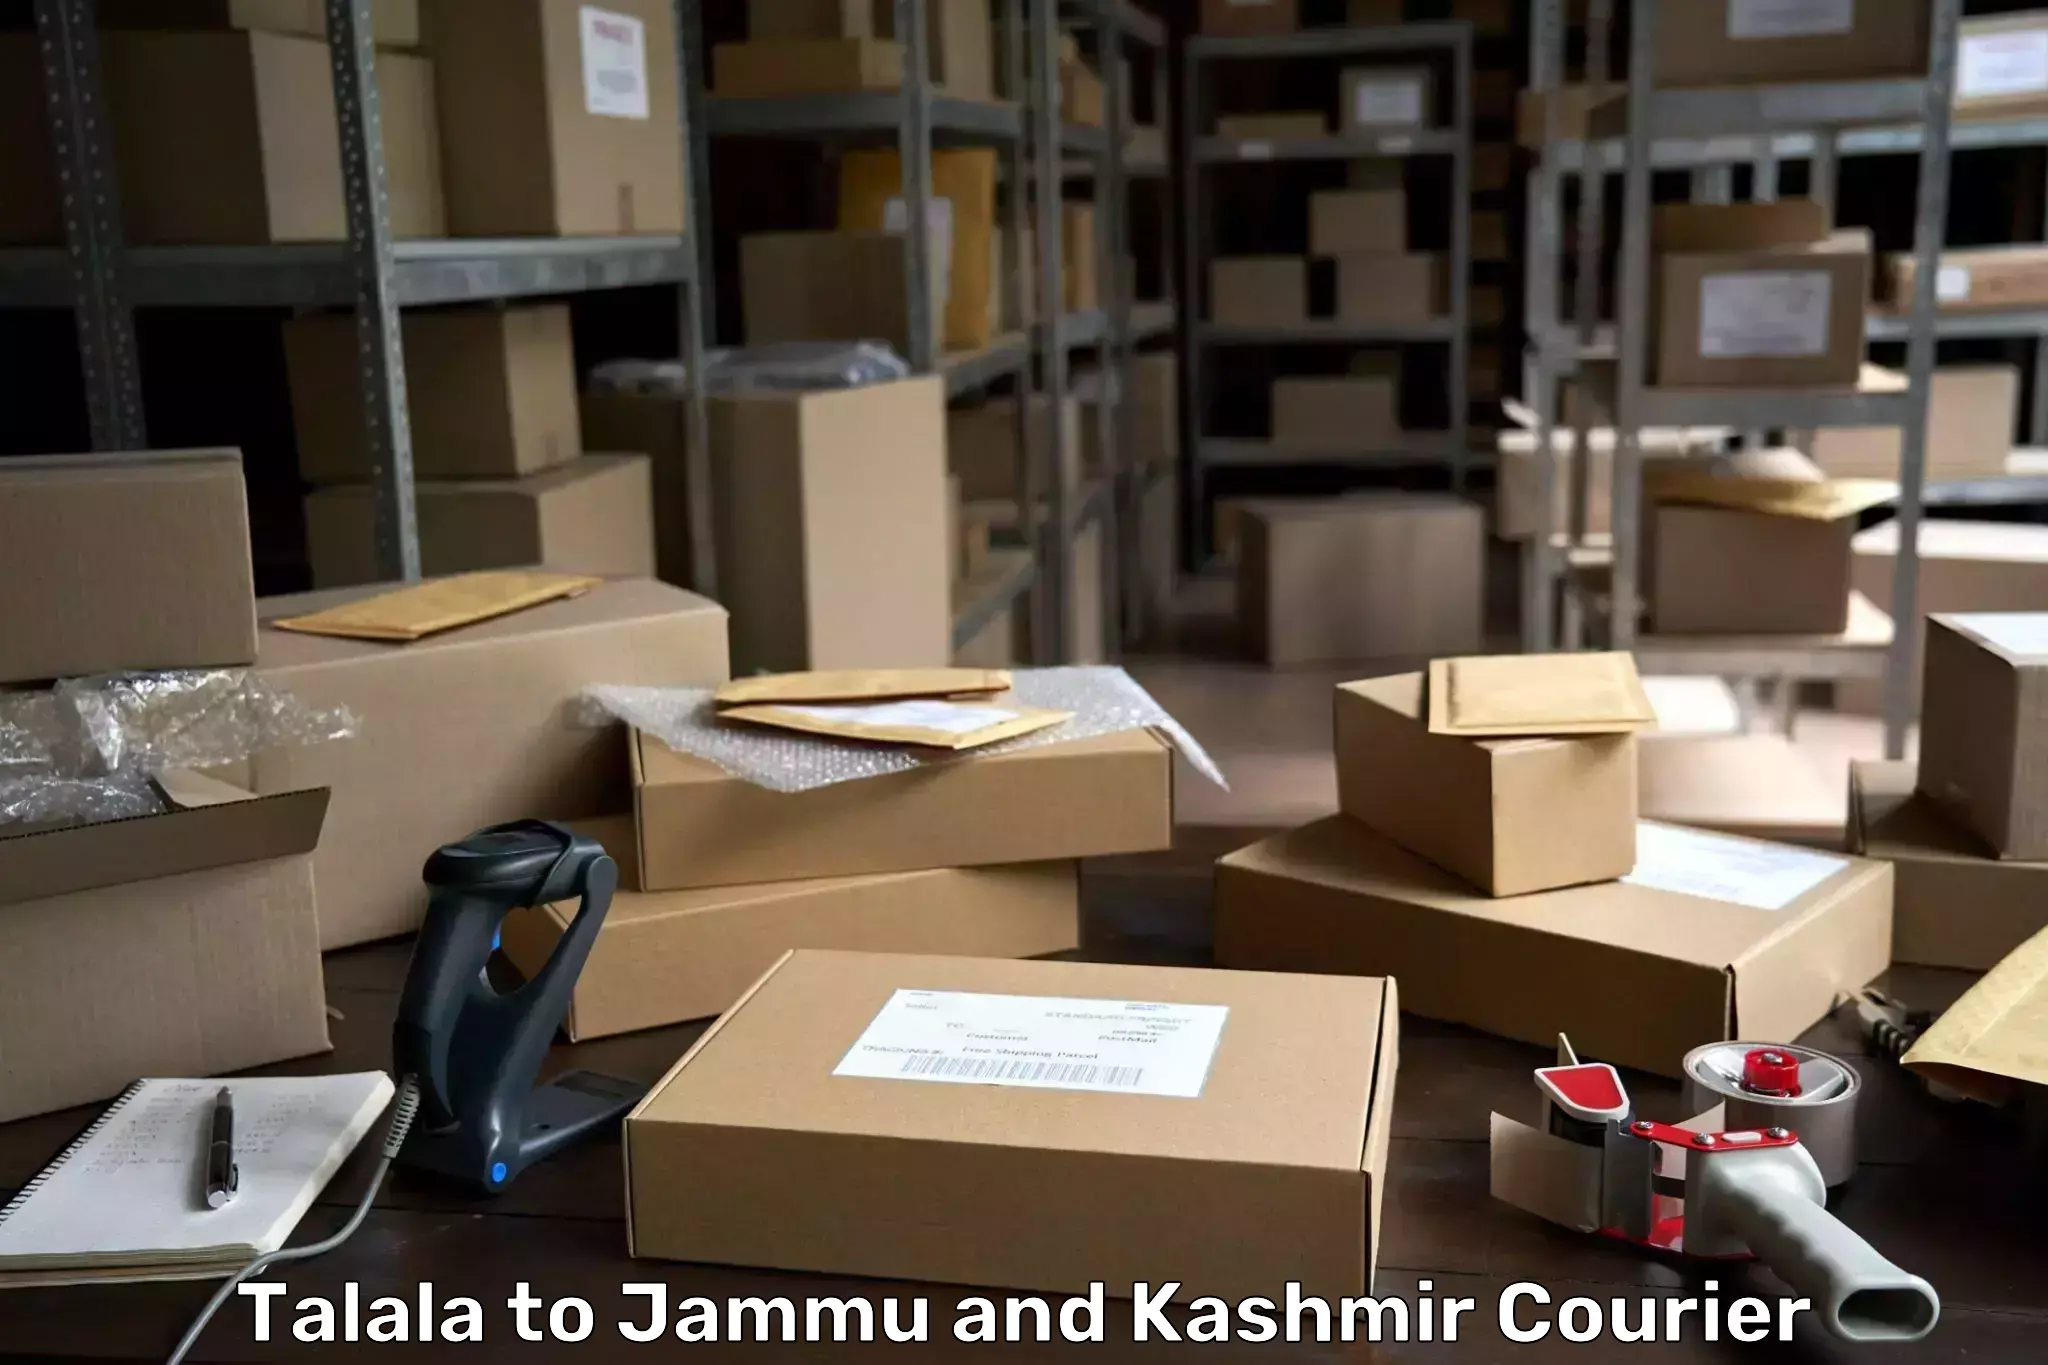 Multi-national courier services Talala to Jammu